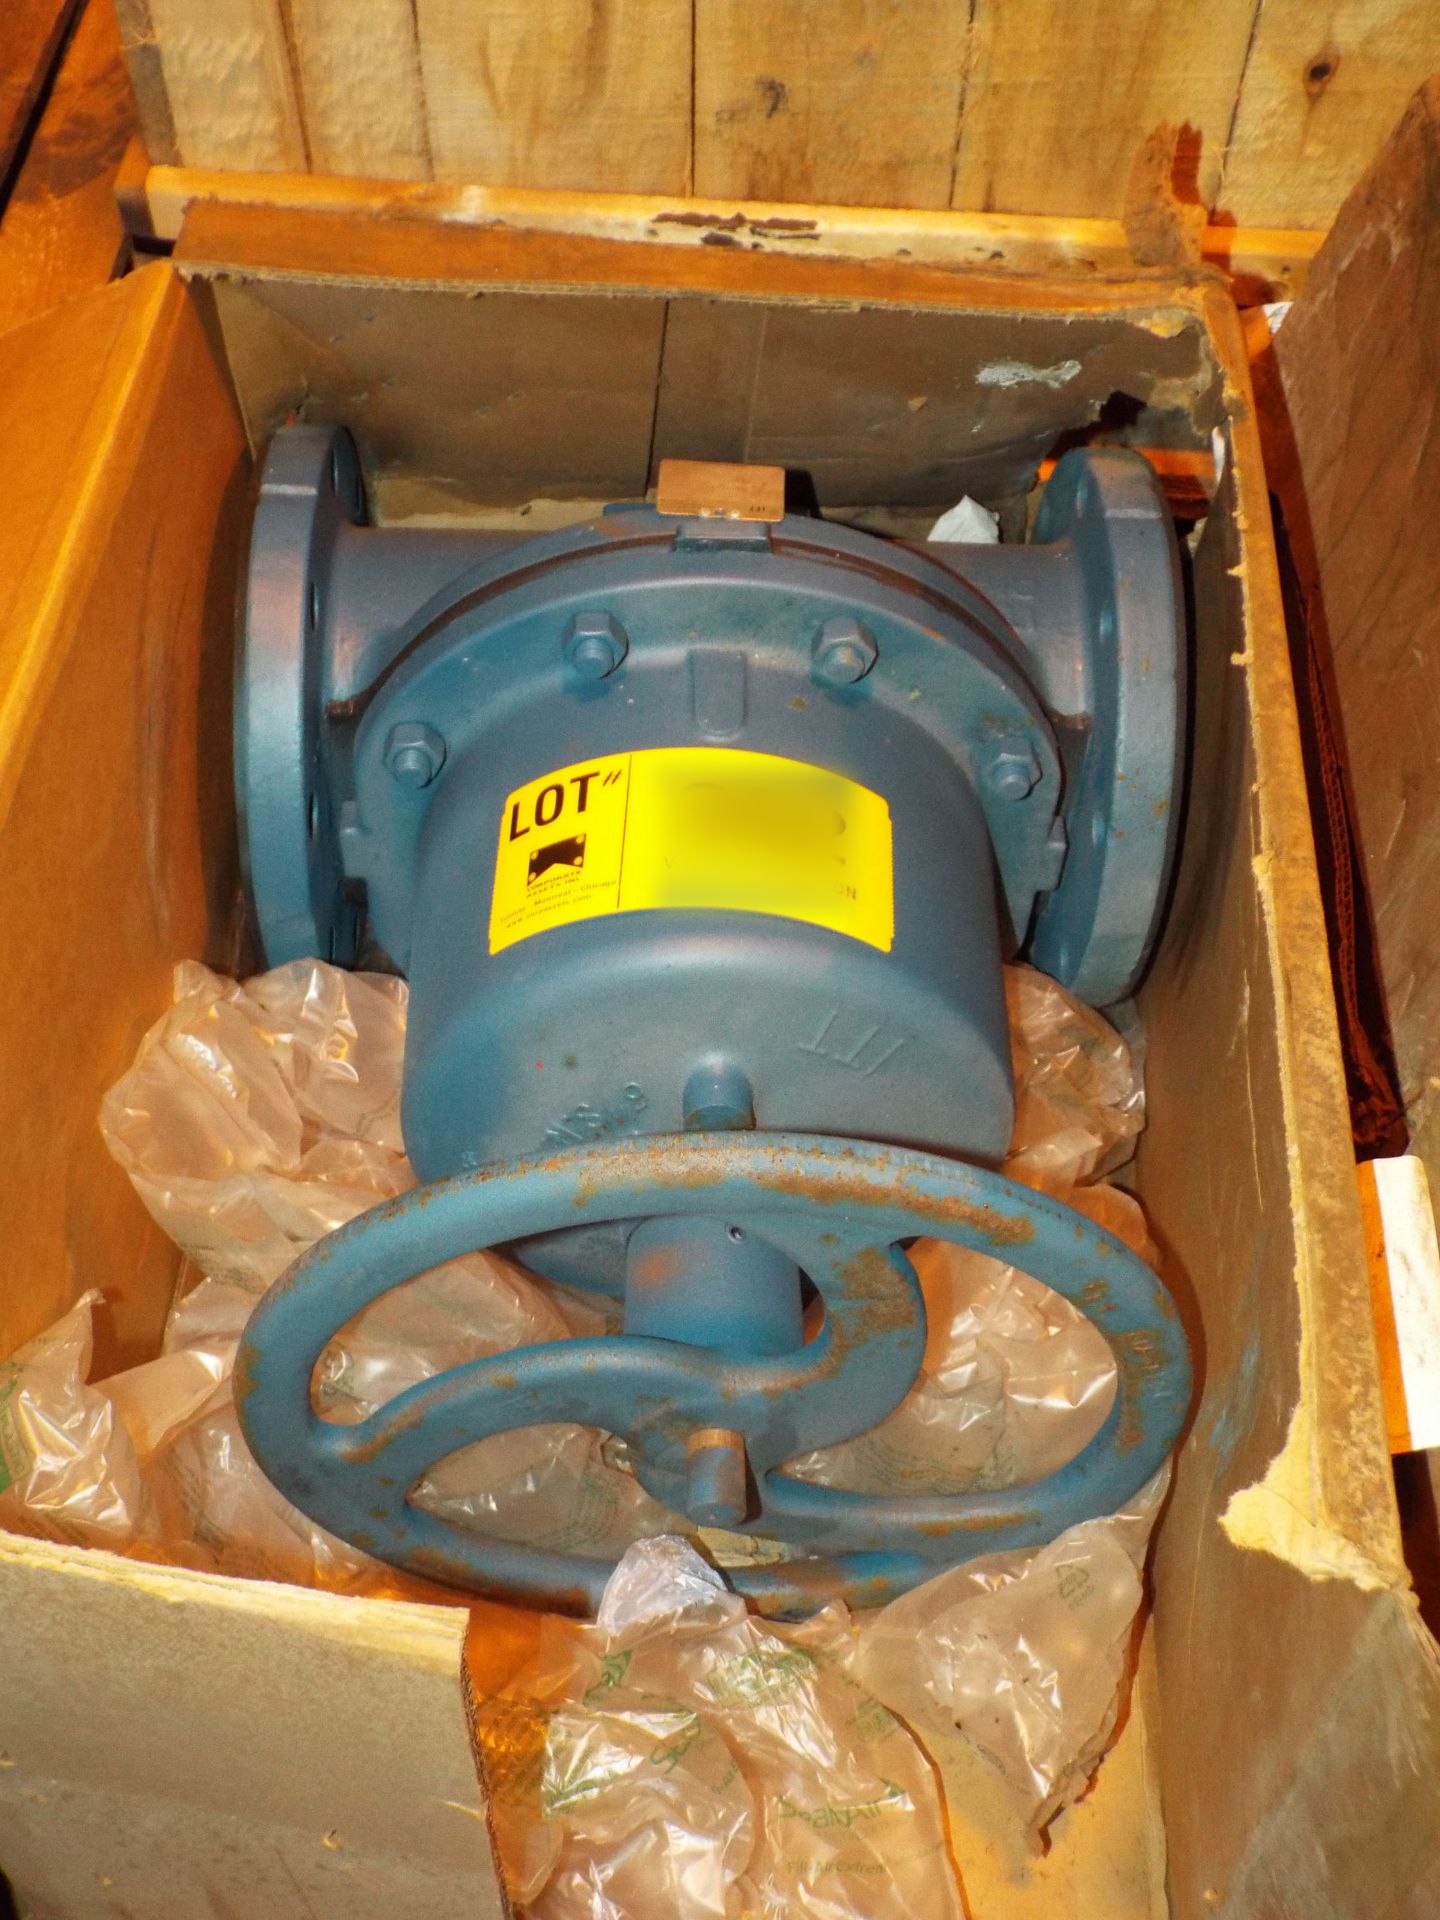 LOT/ CONTENTS OF SKID - (1) 6" FLANGED VALE, (1) DIAPHRAGM VALVE, (1) STRAIGHTWAY VALVE